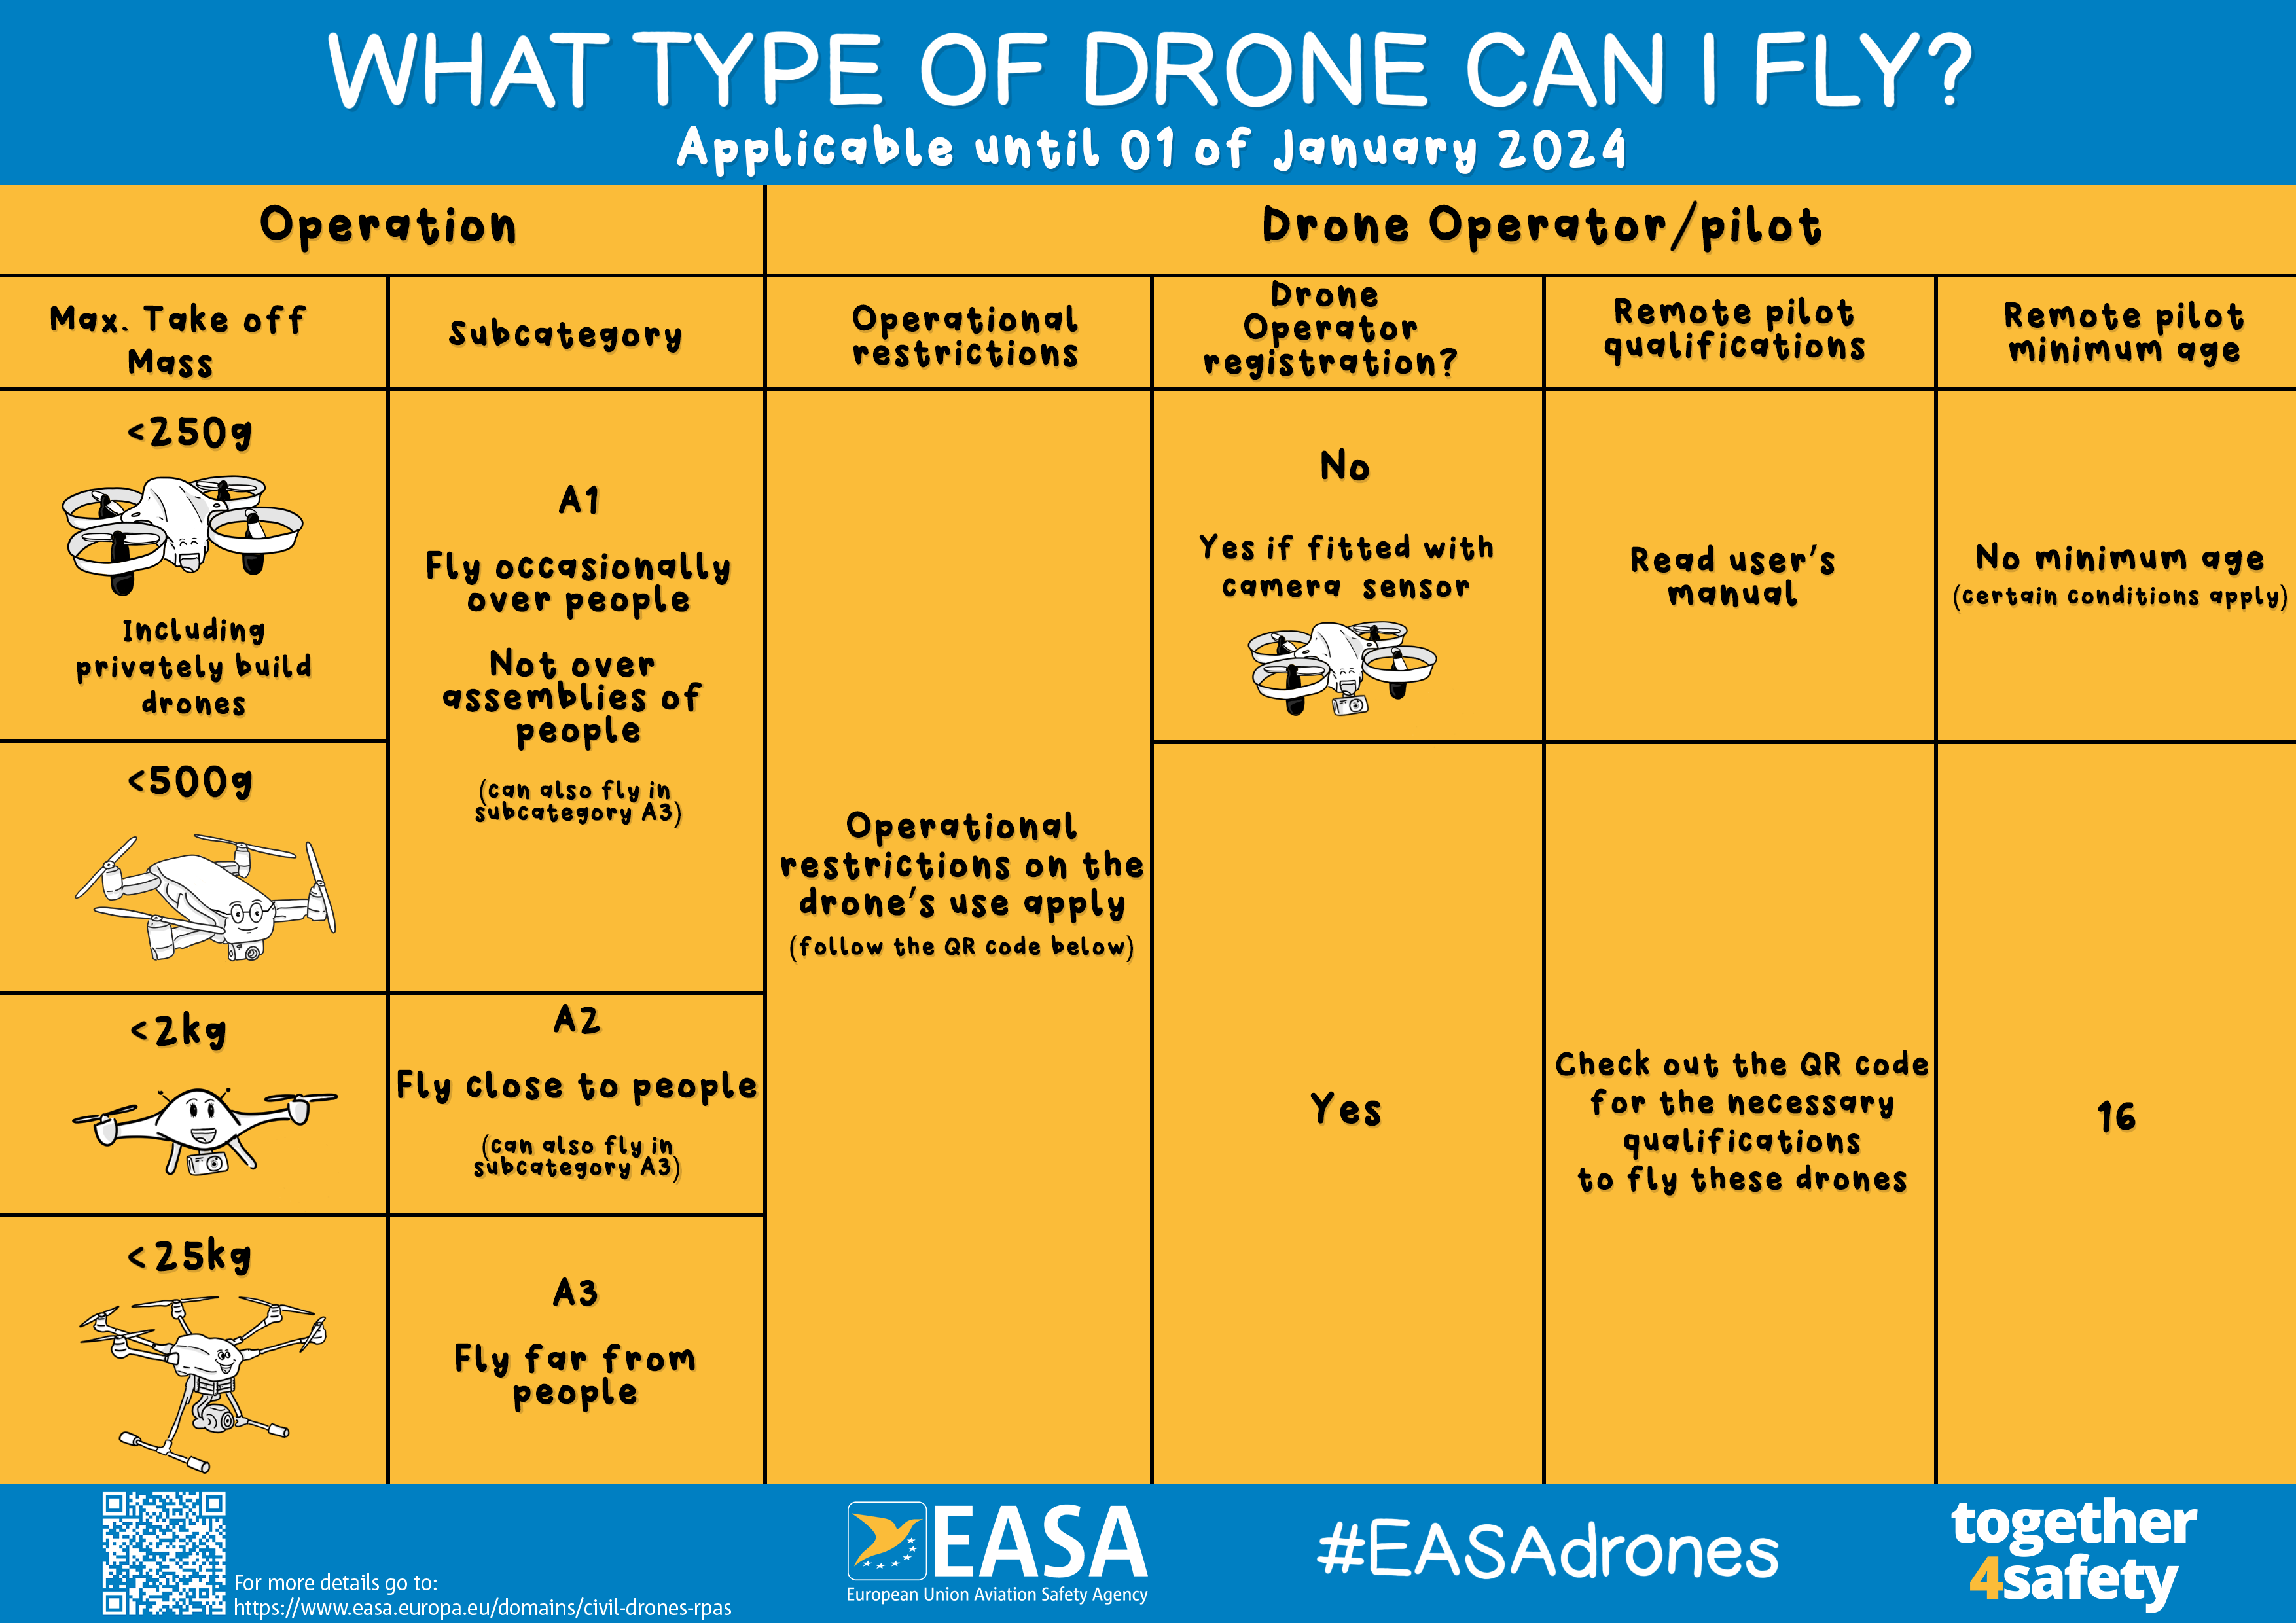 What type of drone can I fly?